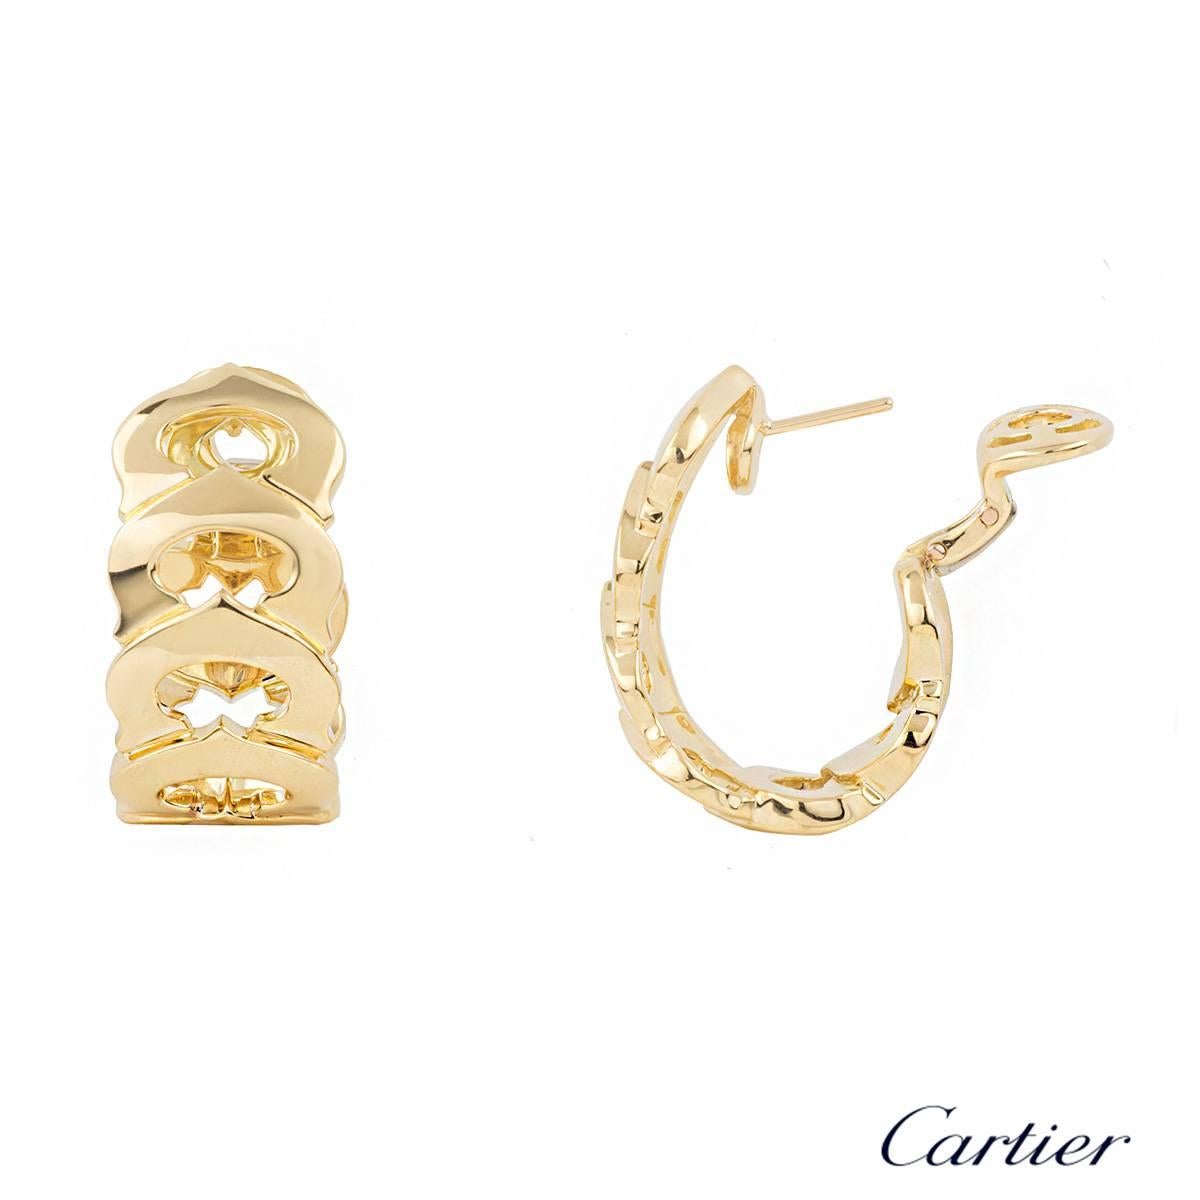 A pair of 18k yellow gold C de Cartier earrings. The hoops are composed of 7 interlinking iconic C de Cartier motifs fastened together with post and clip fittings. The earrings measure approximately 3cm x 1.5cm and have a gross weight of 32.30